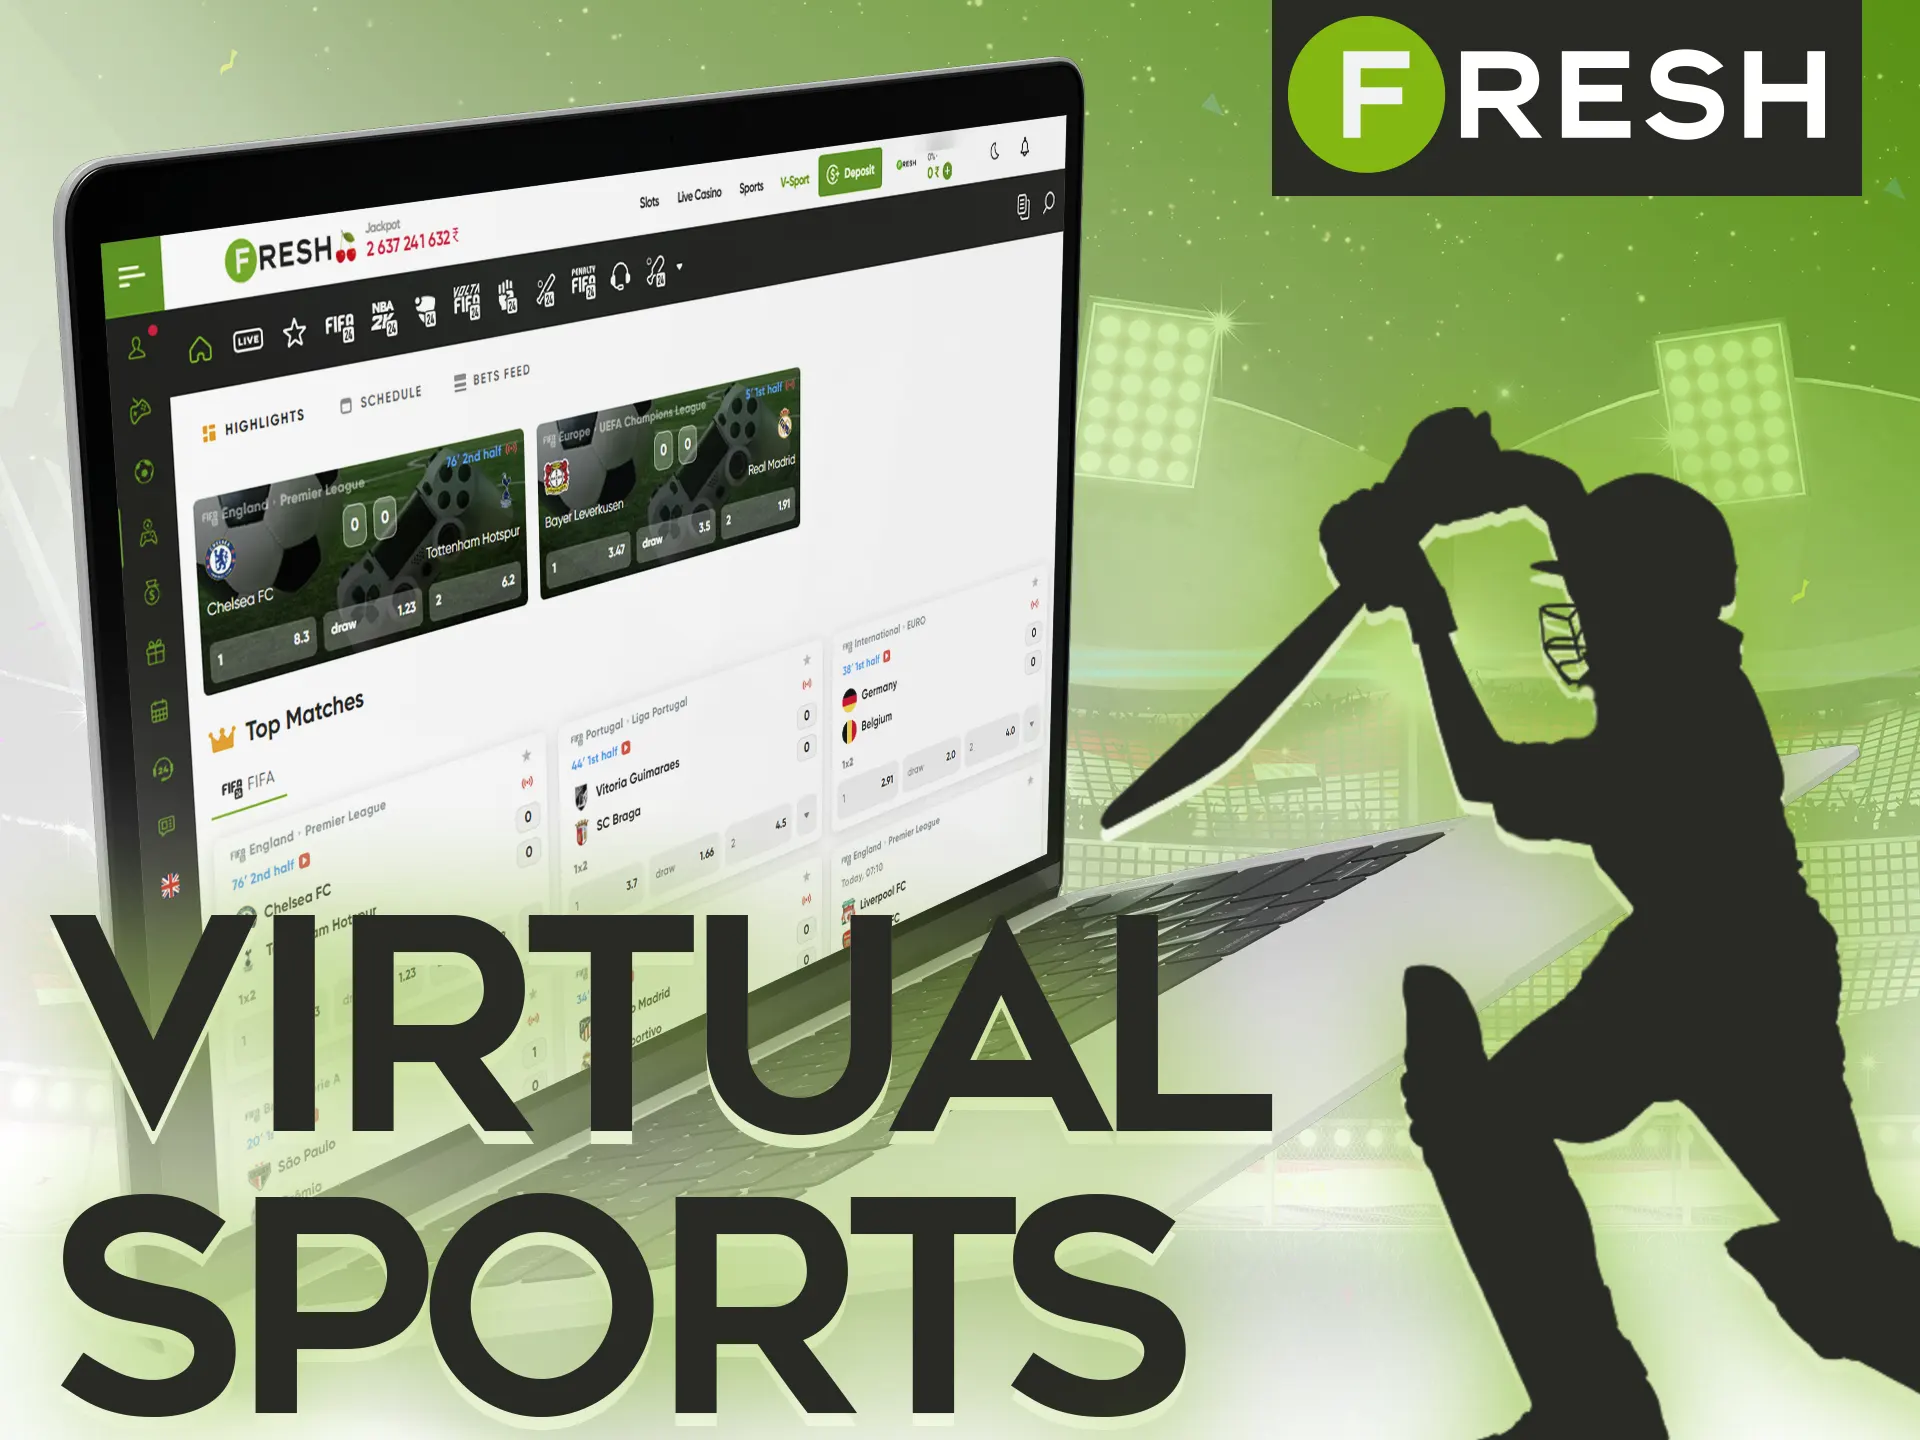 Bet on the most exotic virtual sports at the Fresh Casino.